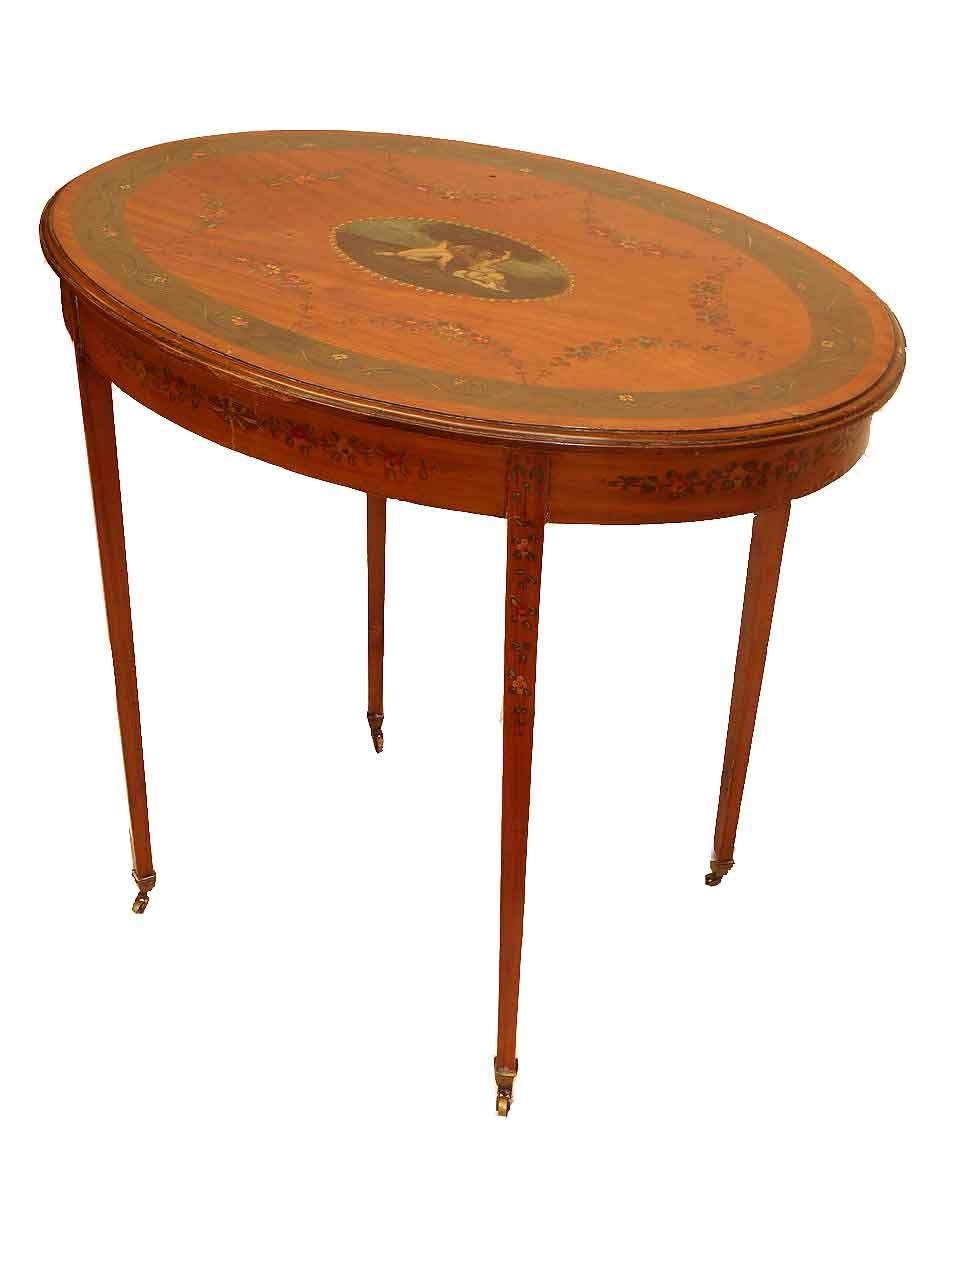 Hand-Painted French Painted Satinwood Table For Sale